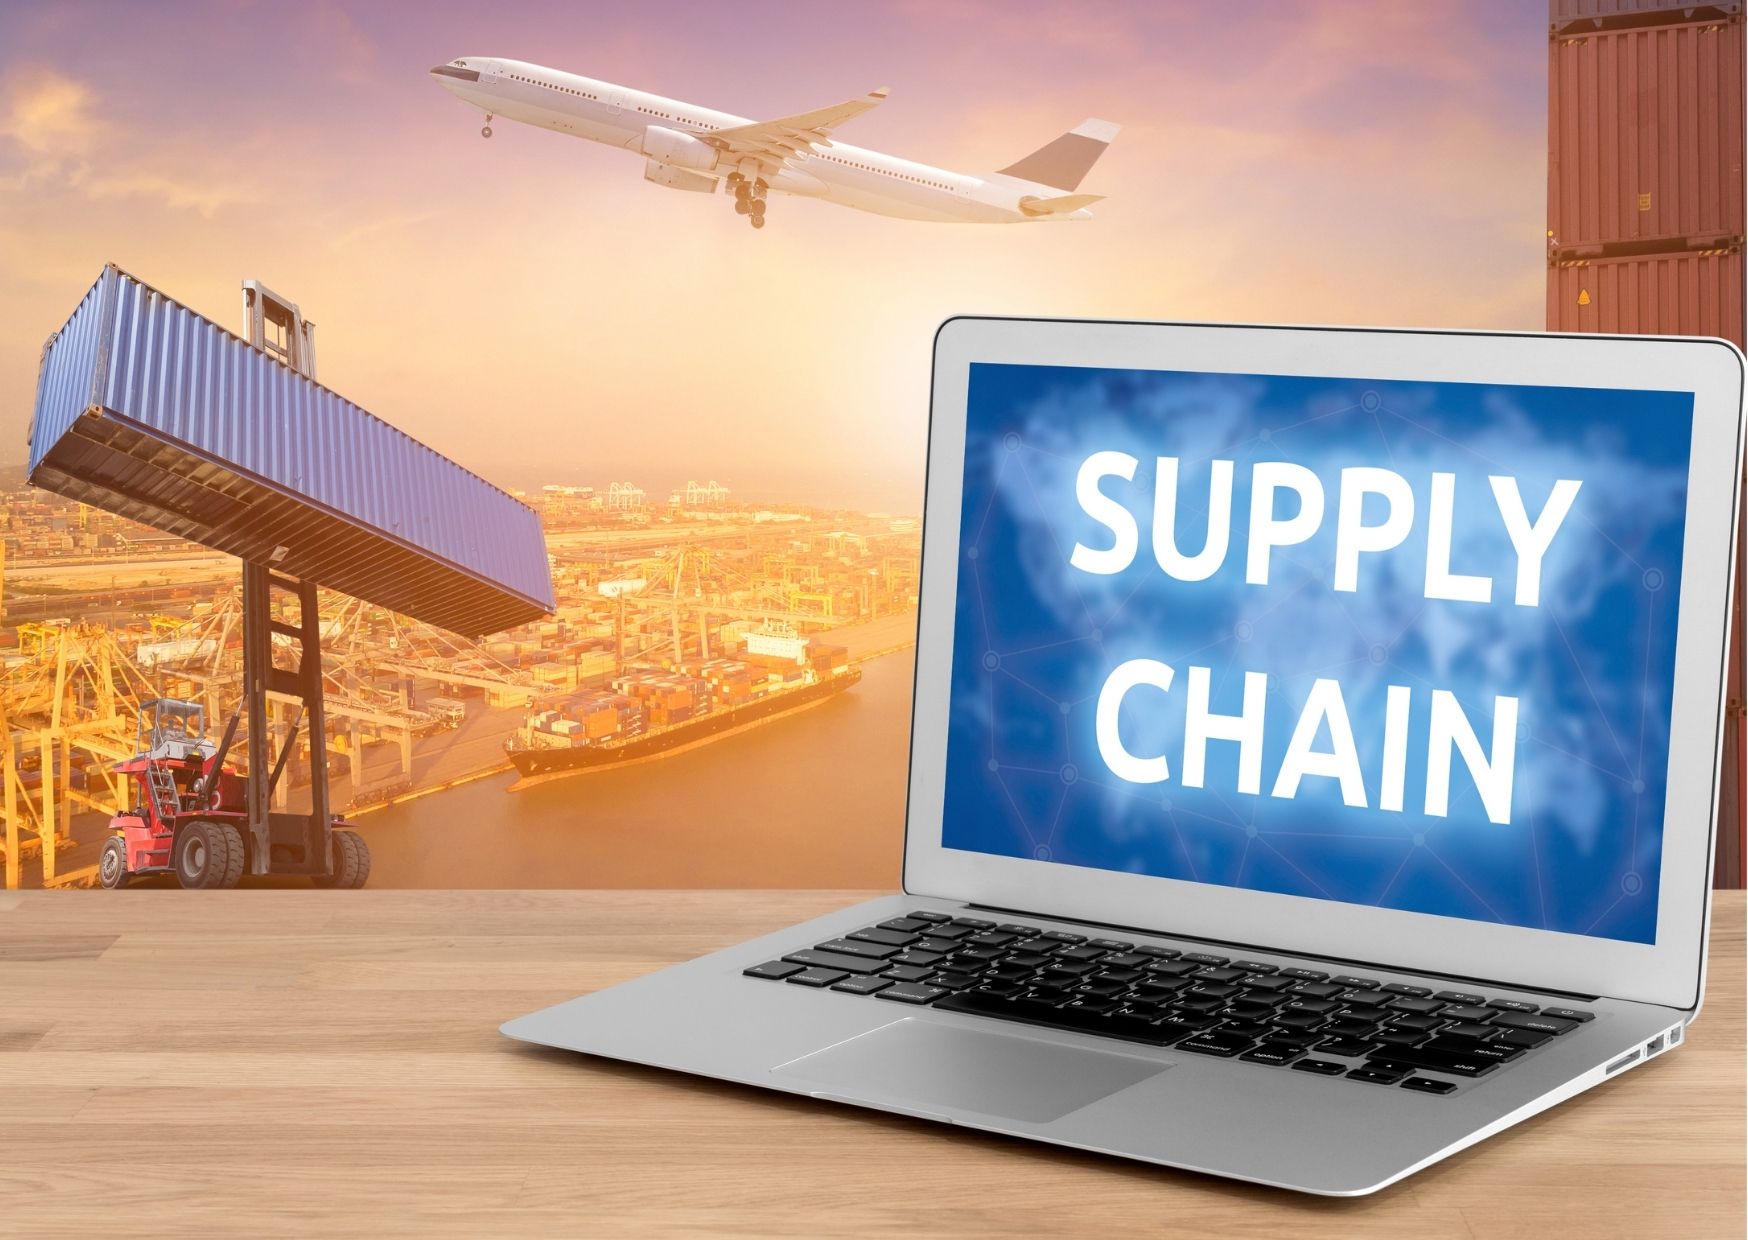 The Pandemic – Supply Chain disruptions and lessons for SCF practitioners